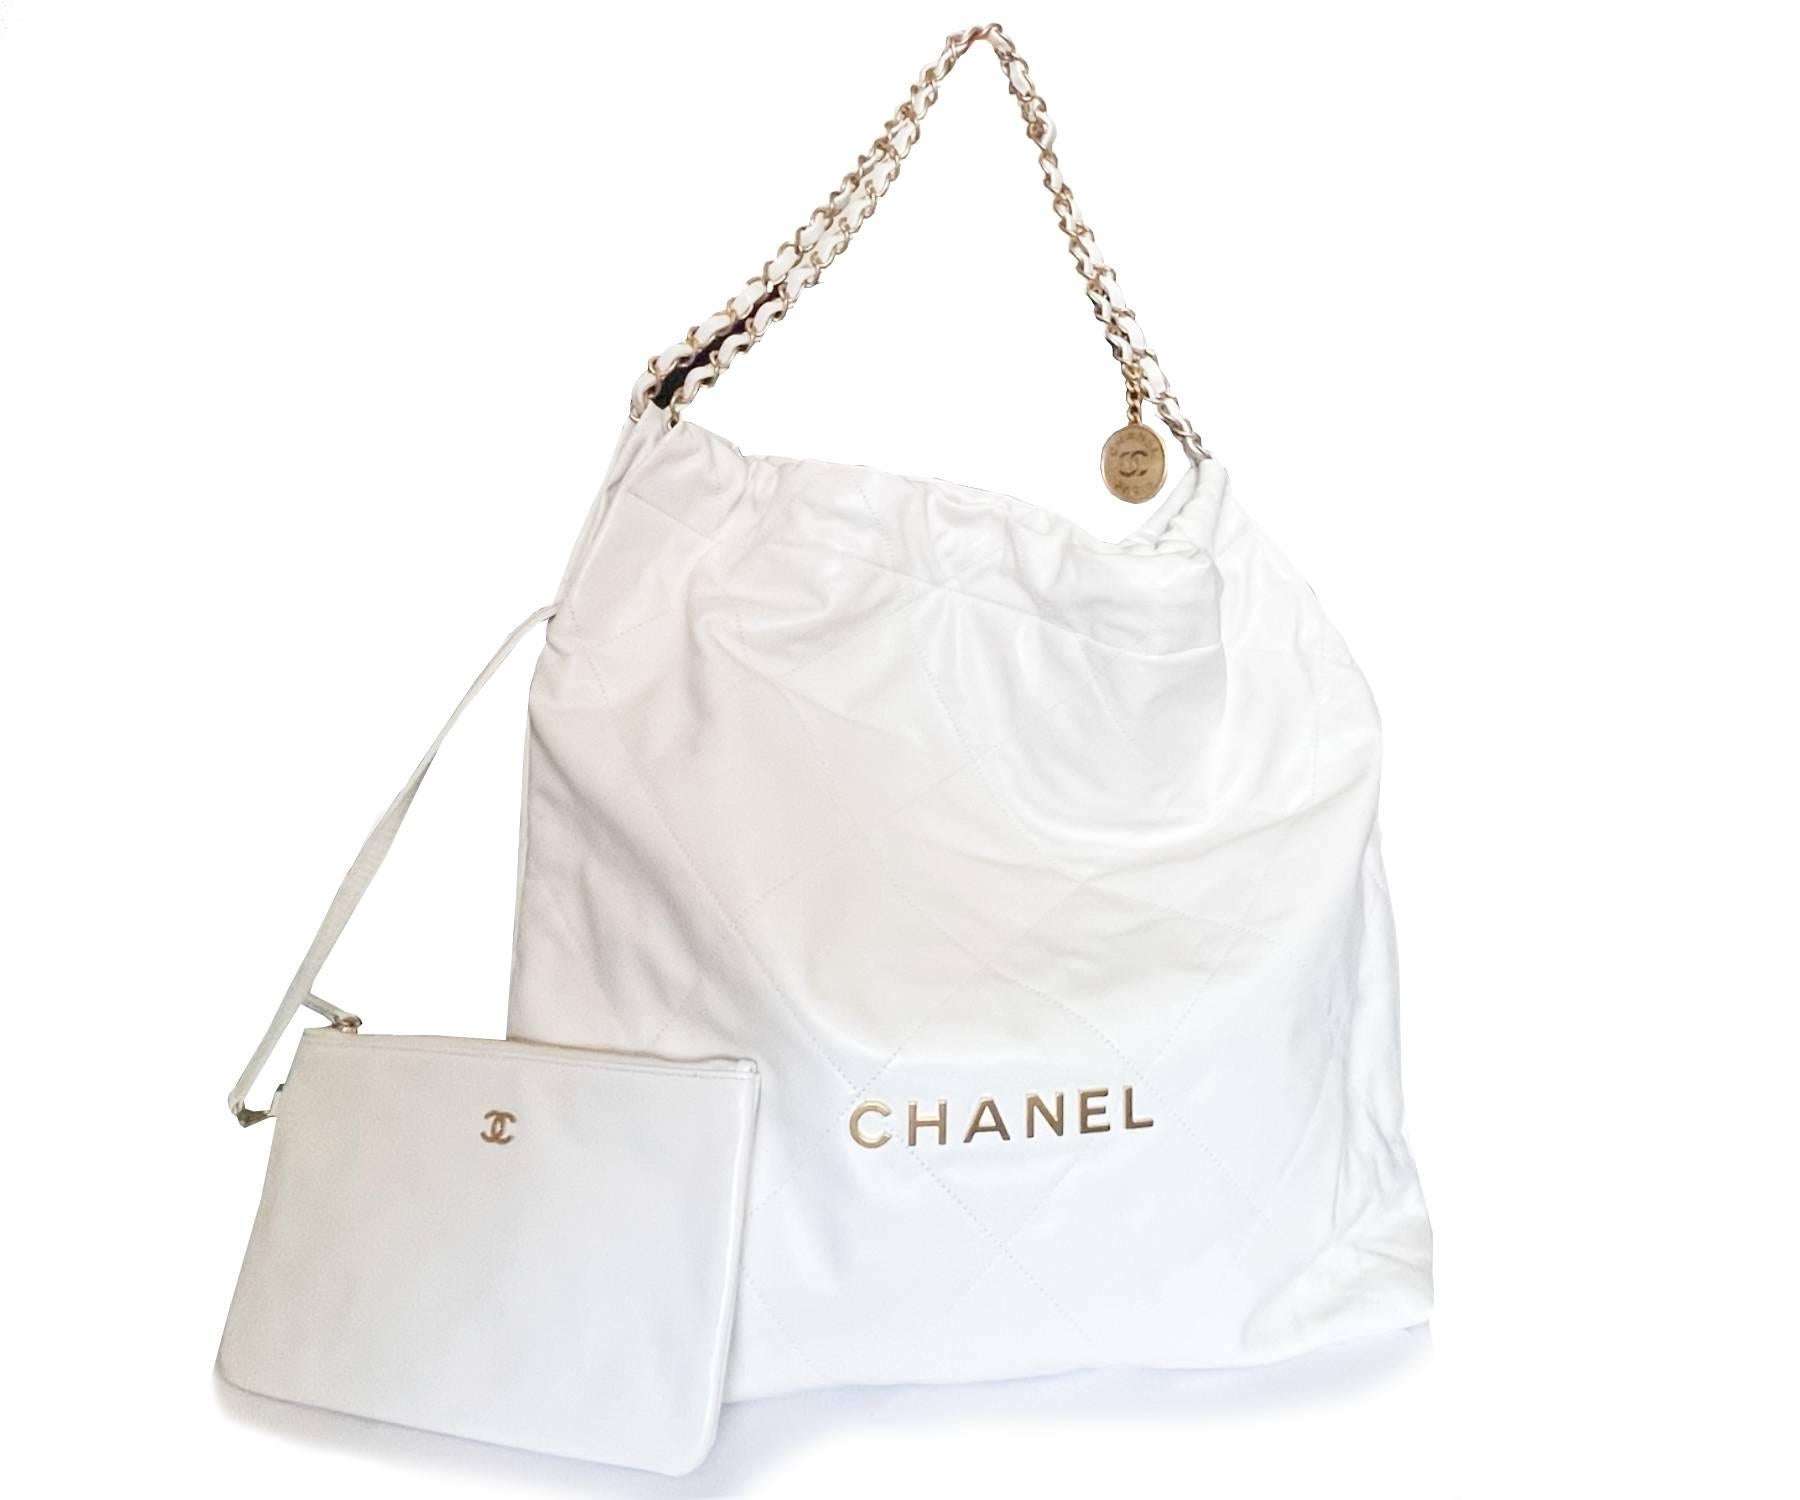 Chanel 22 Brand New White Large Tote Shoulder Bag

* XXX XXXX
* Made in Italy
* Comes with original box, dustbag, booklet, camellia flower and ribbon
* Brand New & Sold Out

-Approximately 3.9″ x 18.3″ x 17.9″